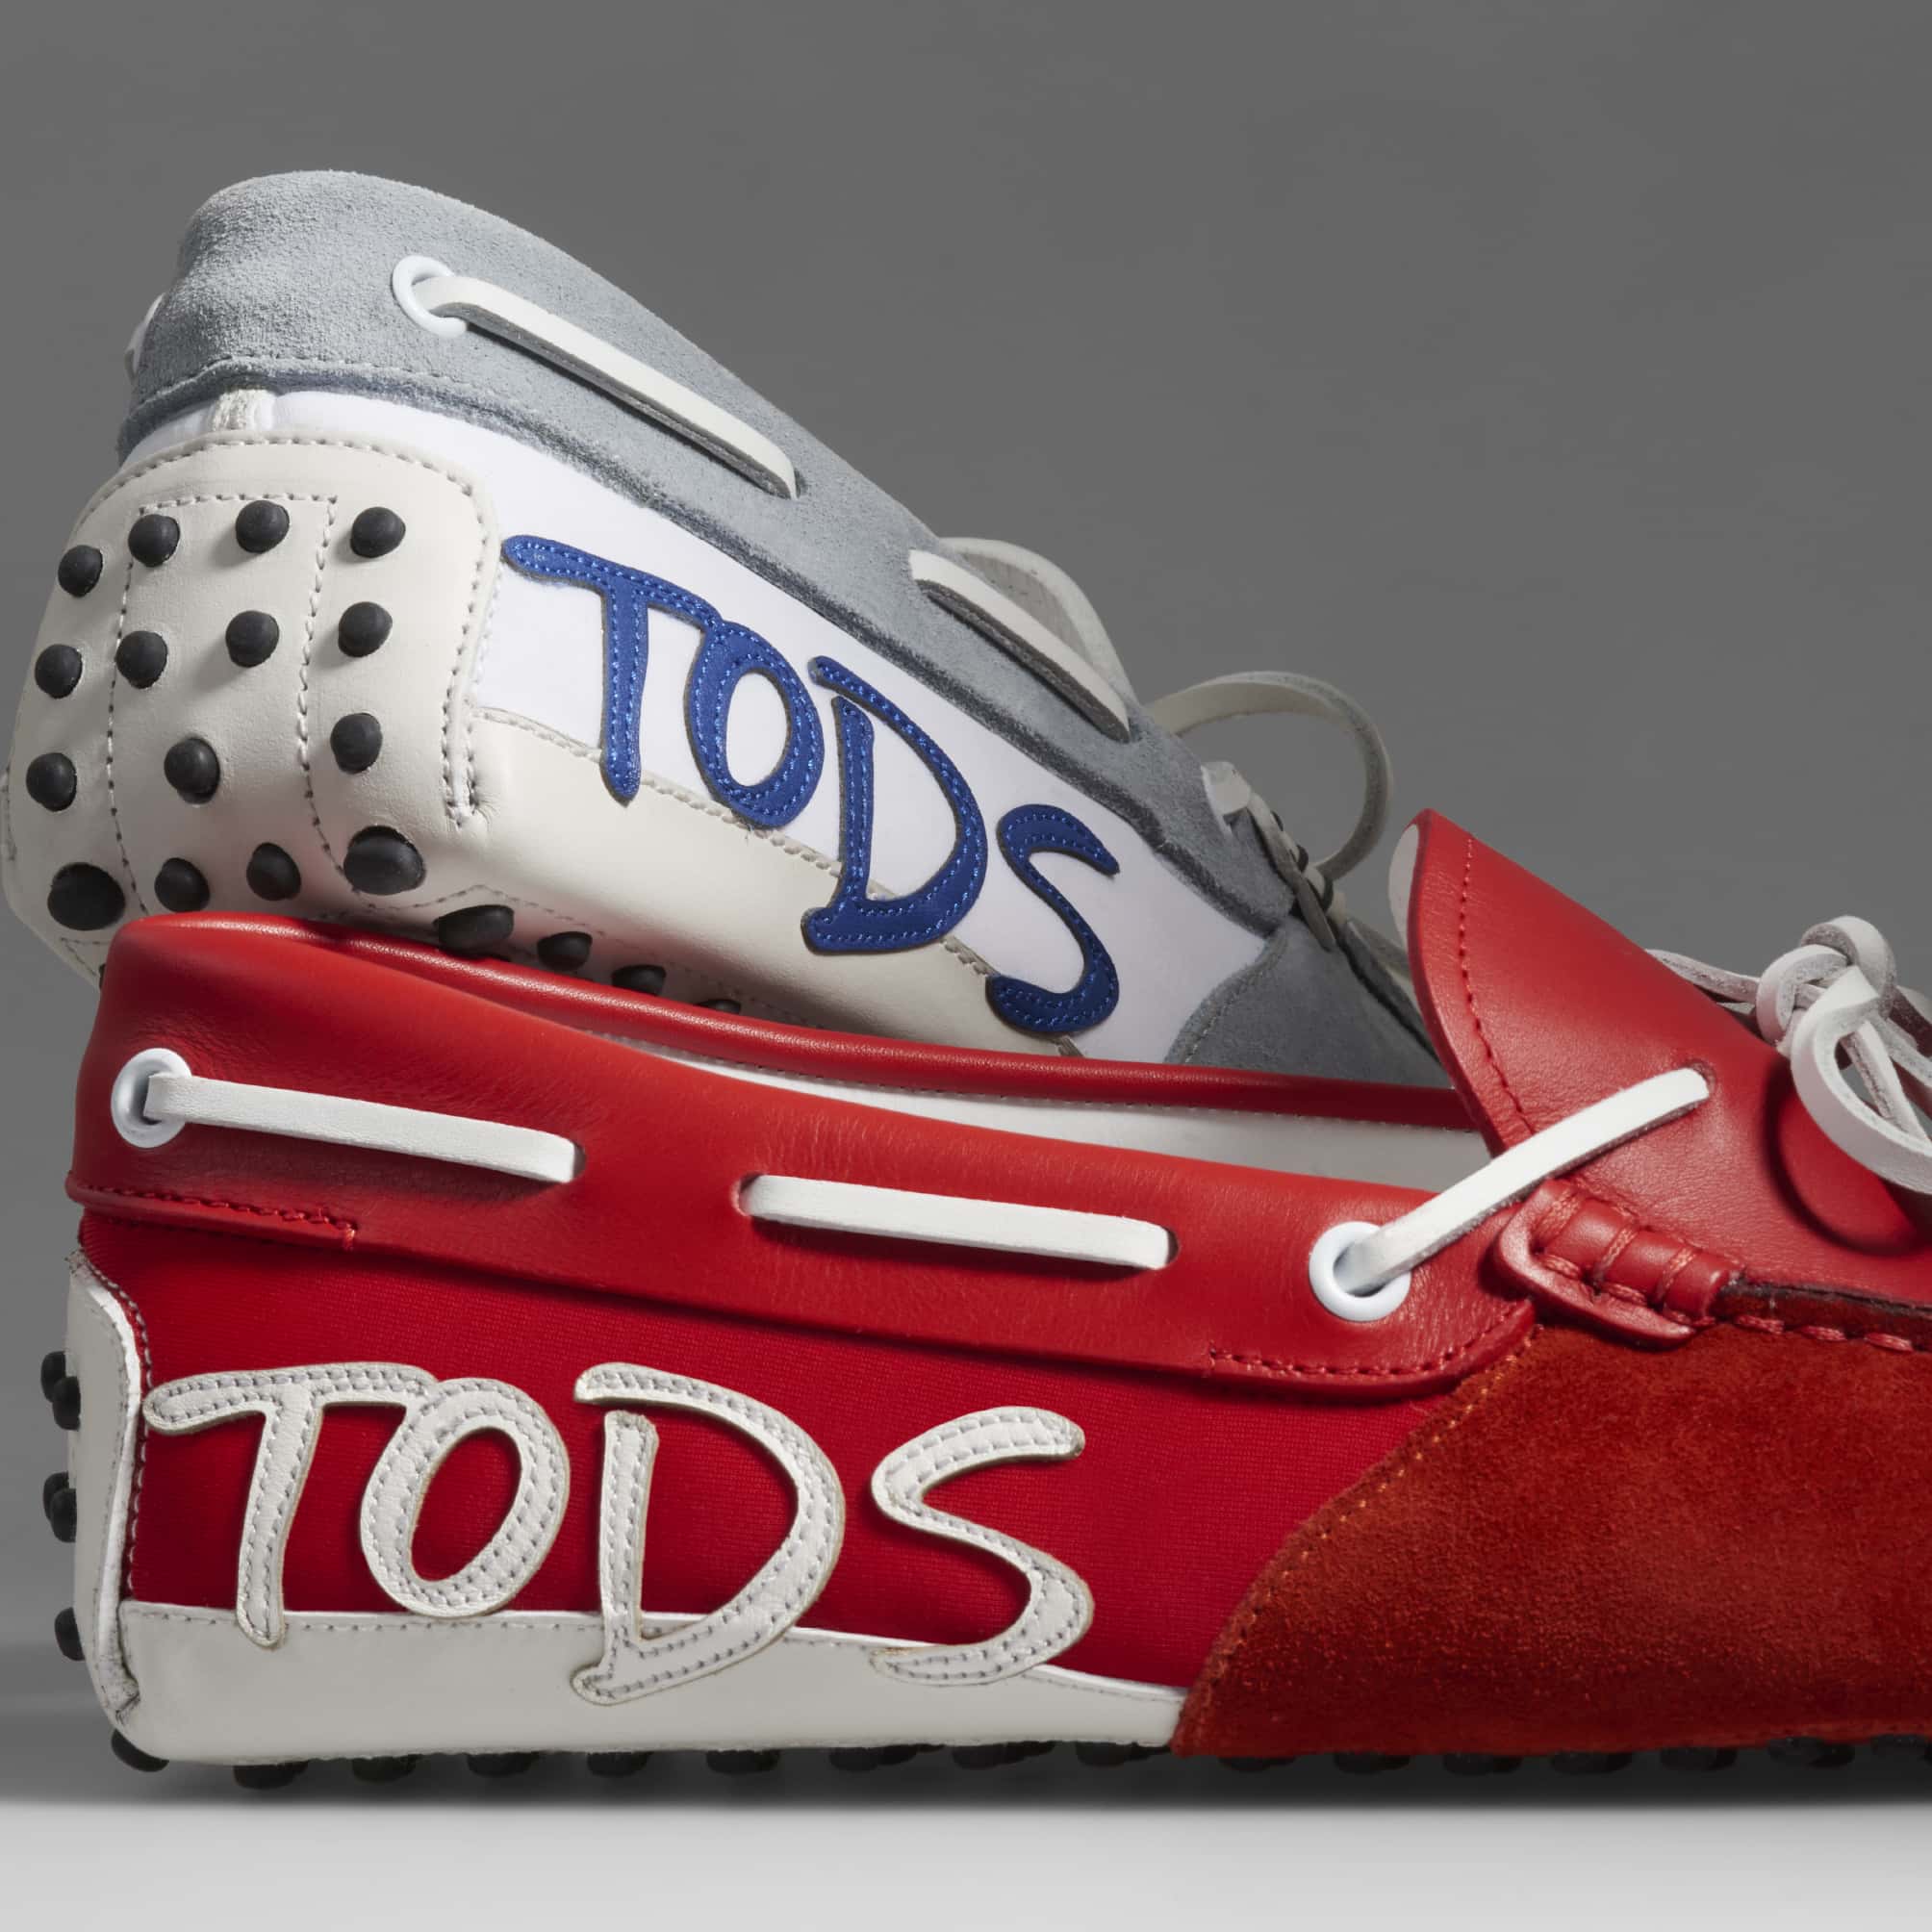 tods sneakers 2018